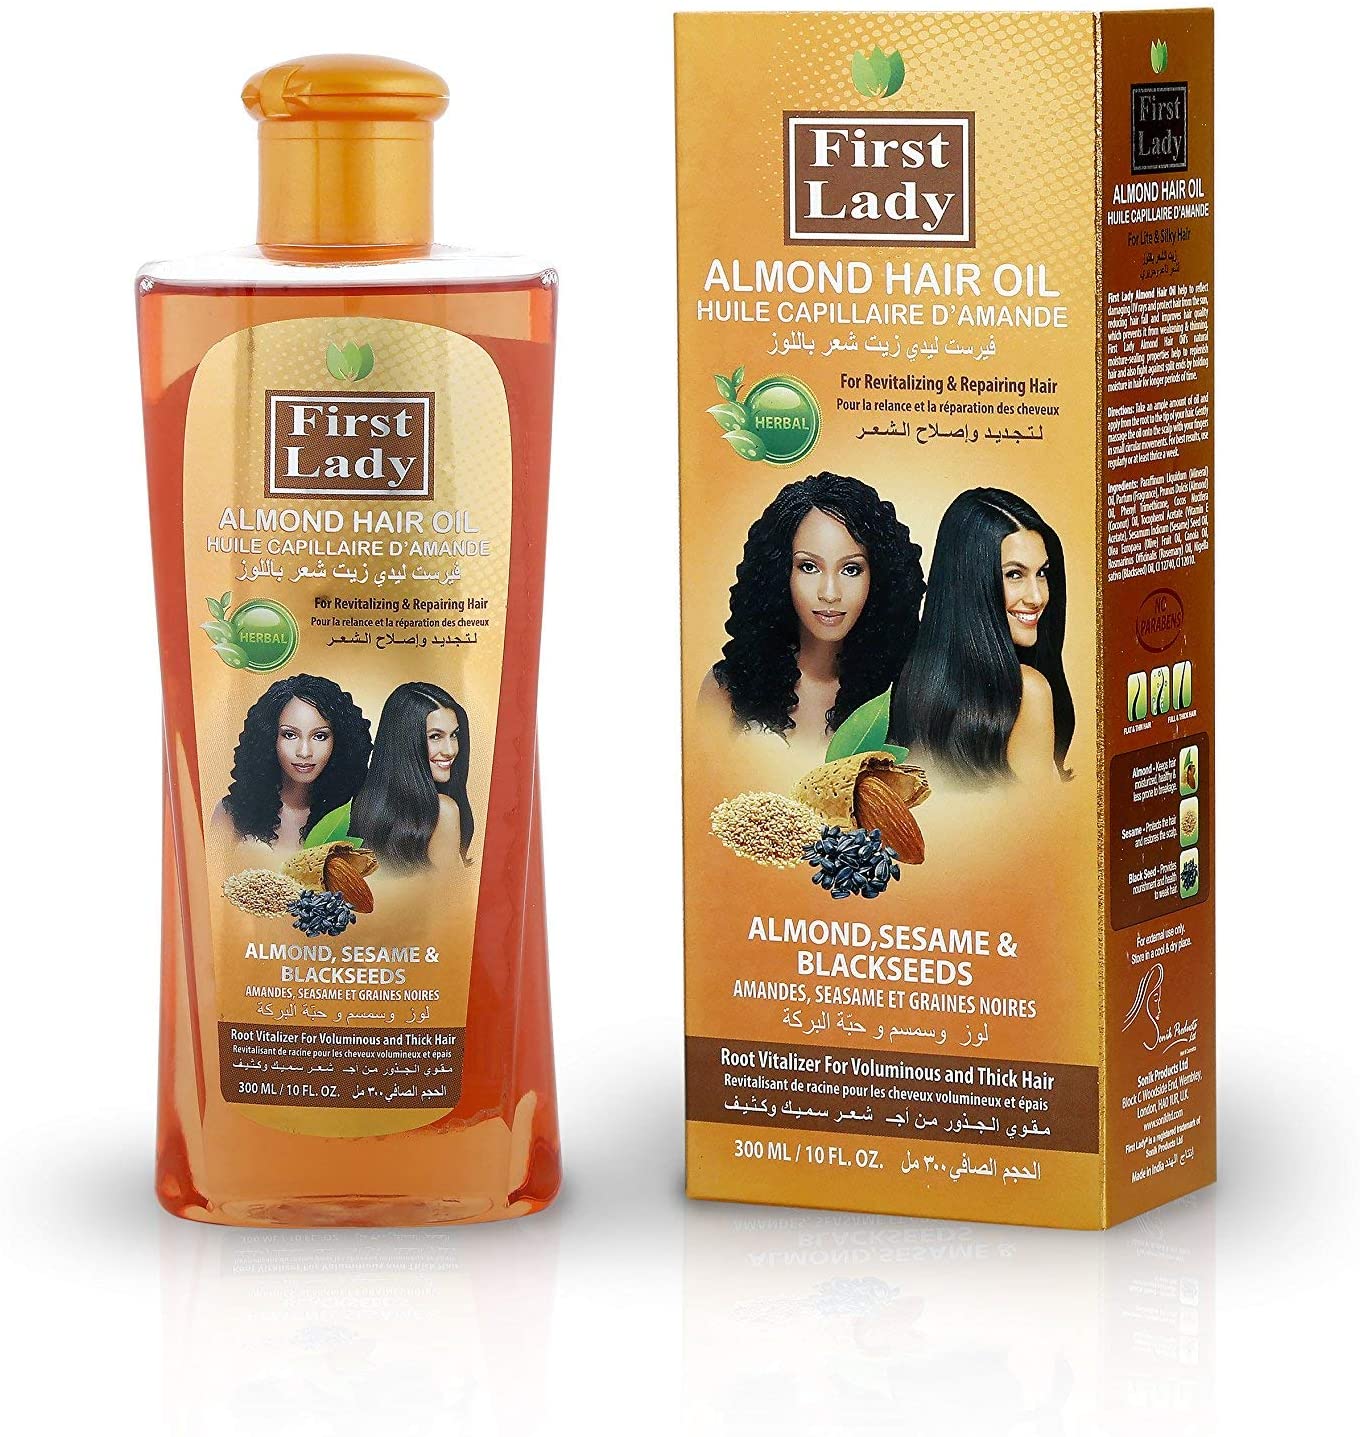 First Lady Almond Hair Oil helps reduces hair fall, fights against split ends, prevents hair from weakening & thinning, and moisturises hair